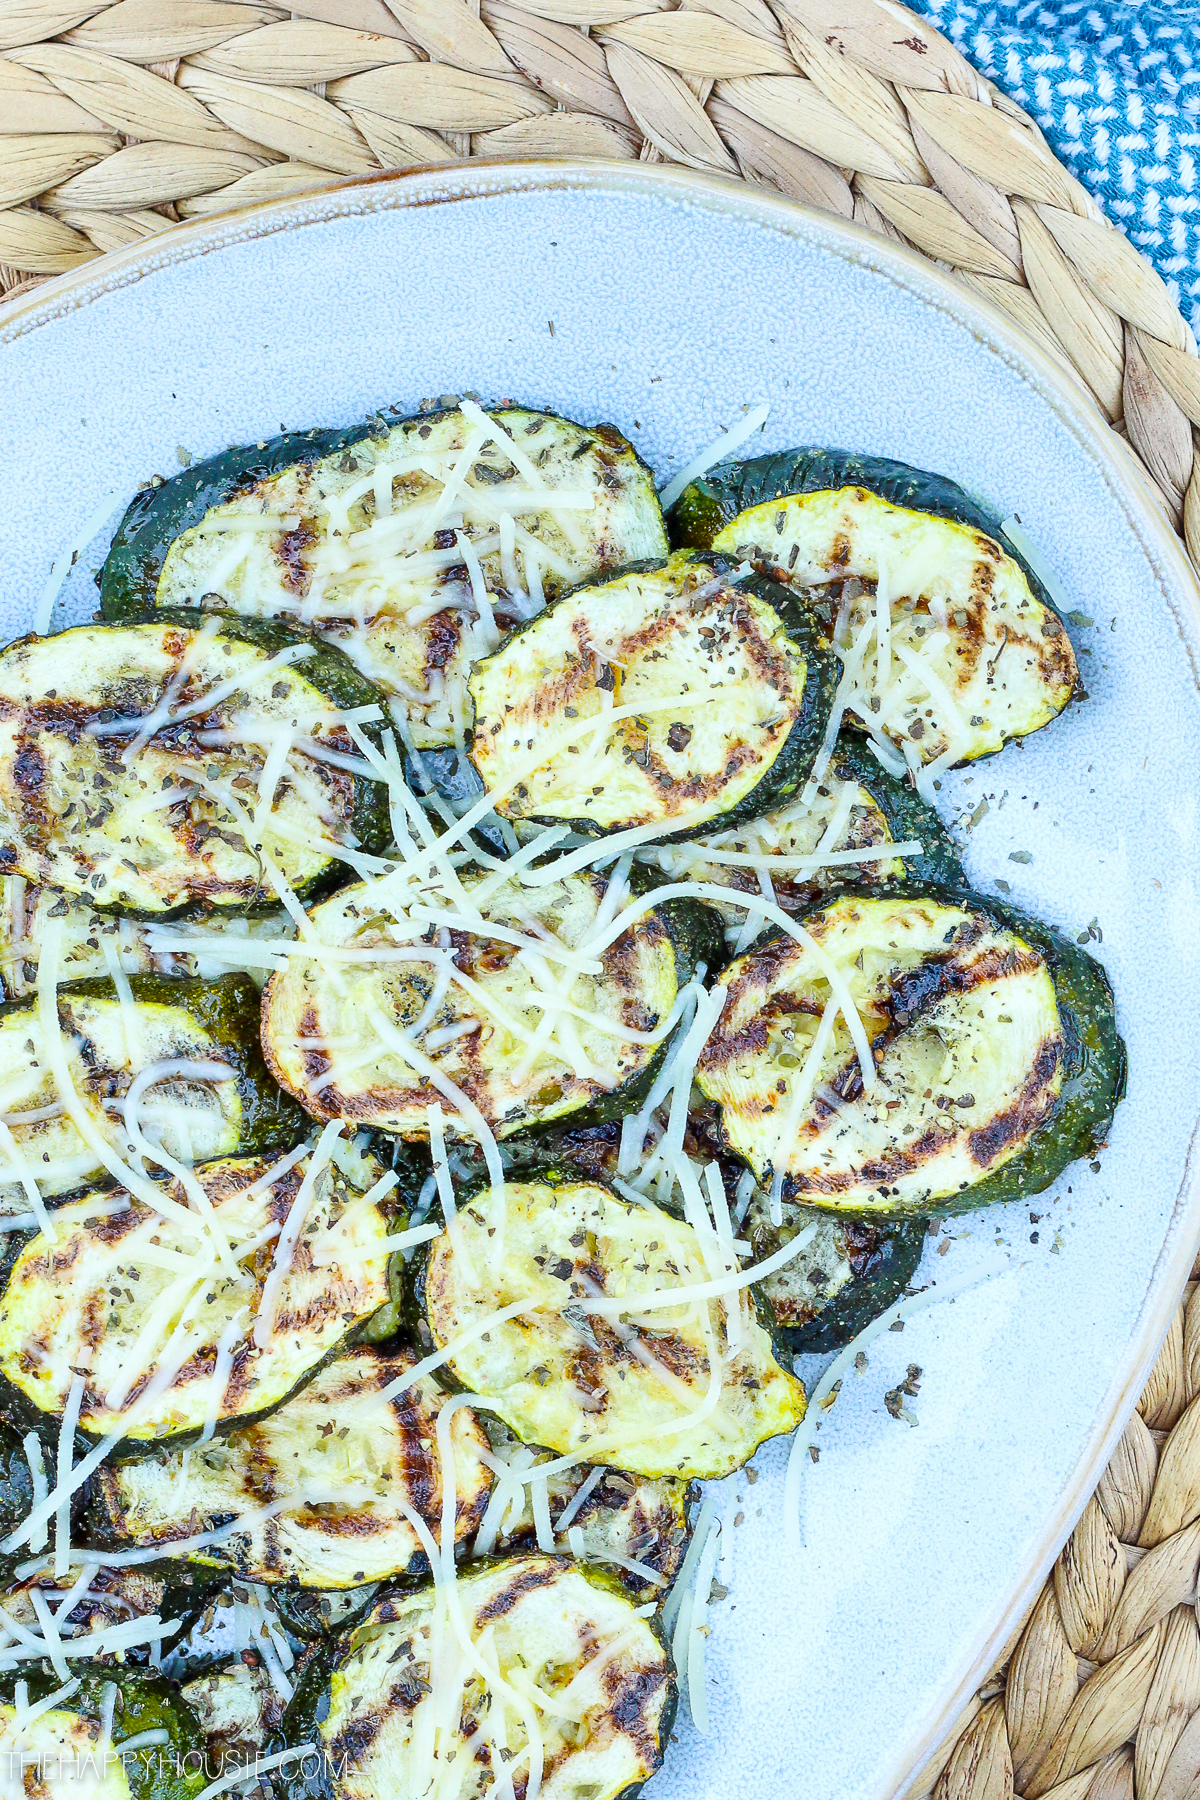 Grilled Zucchini with Parmesan on the BBQ